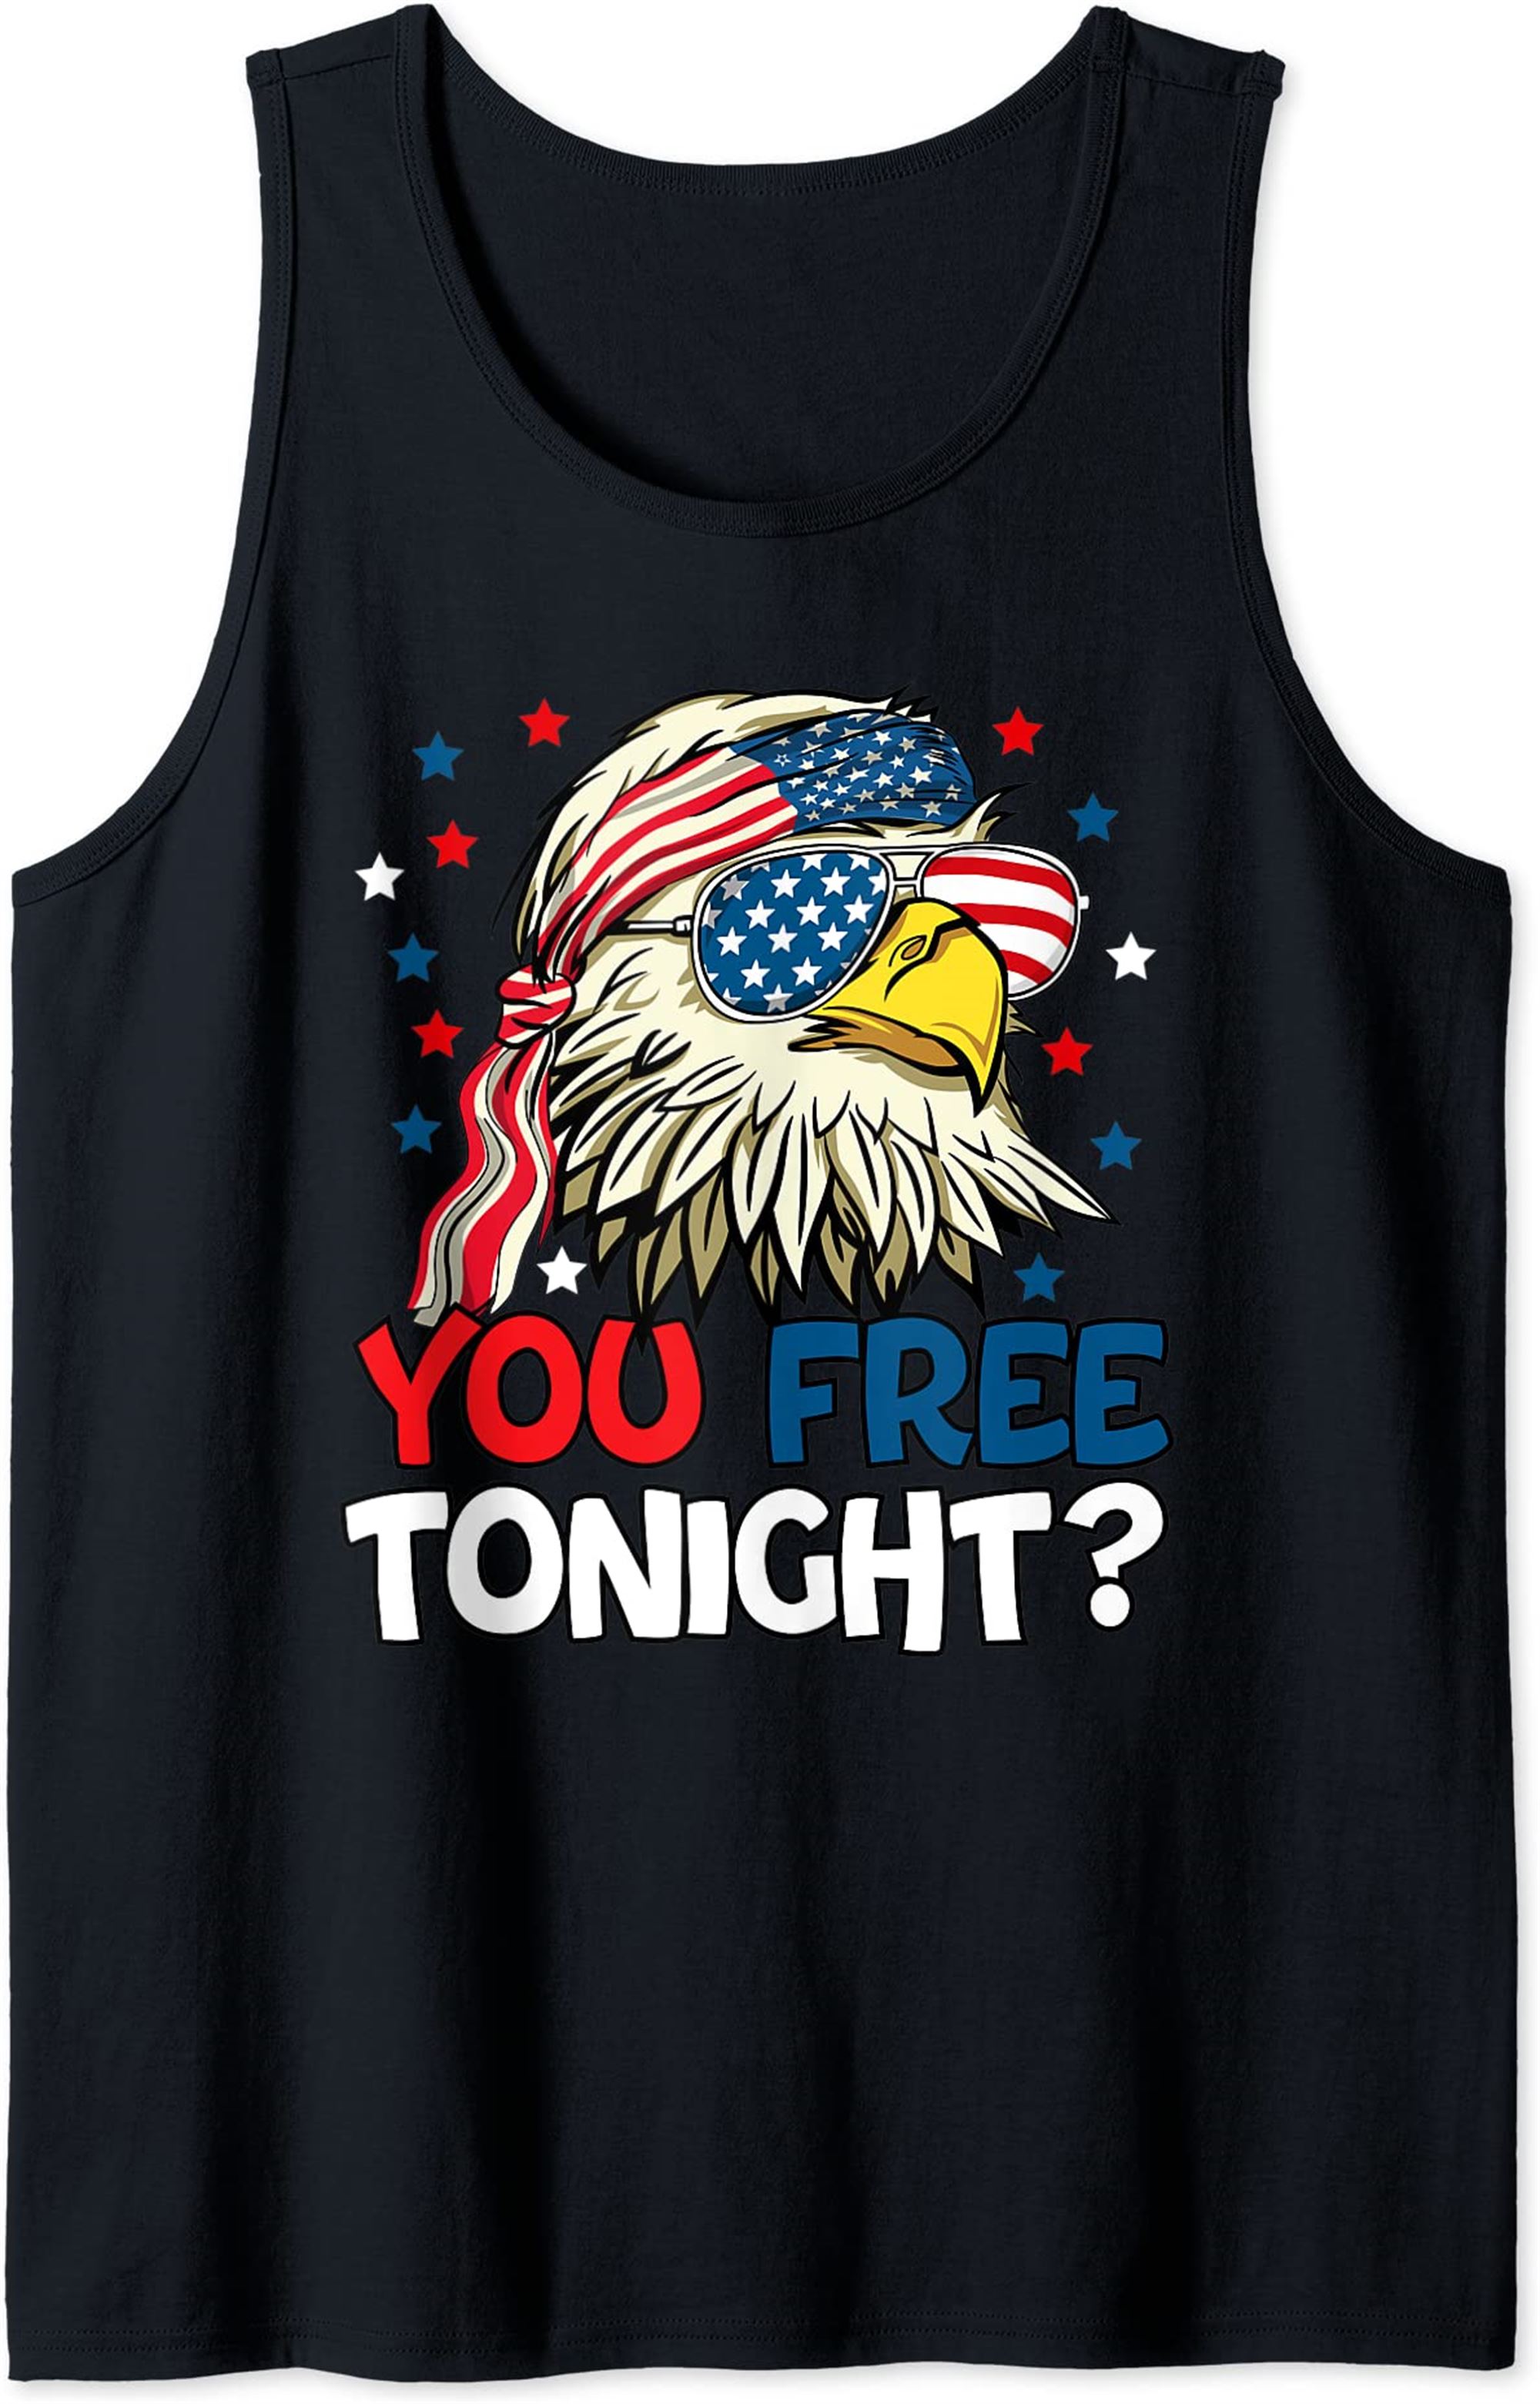 Patriotic American Bald Eagle 4th Of July You Free Tonight Tank Top Plus Size Up To 5xl